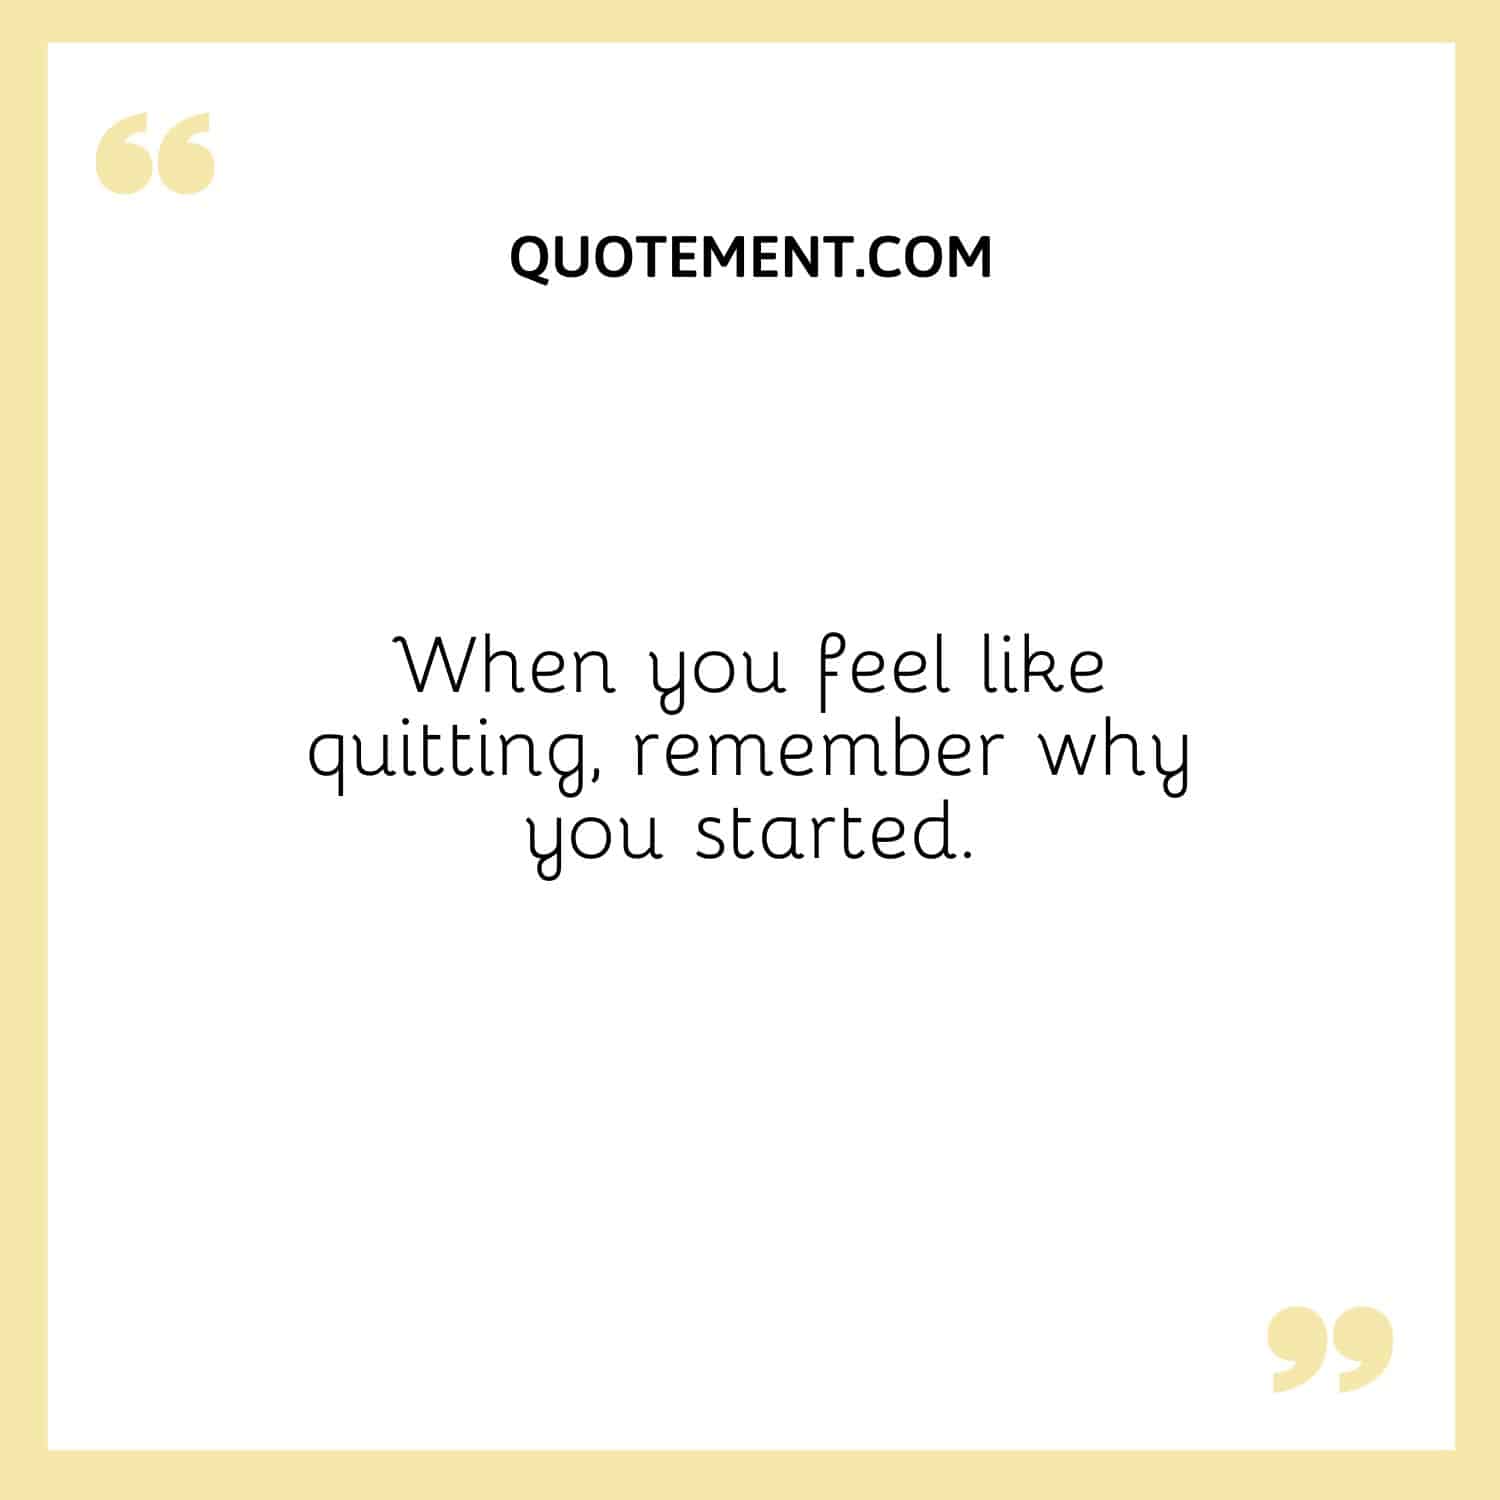 remember why you started